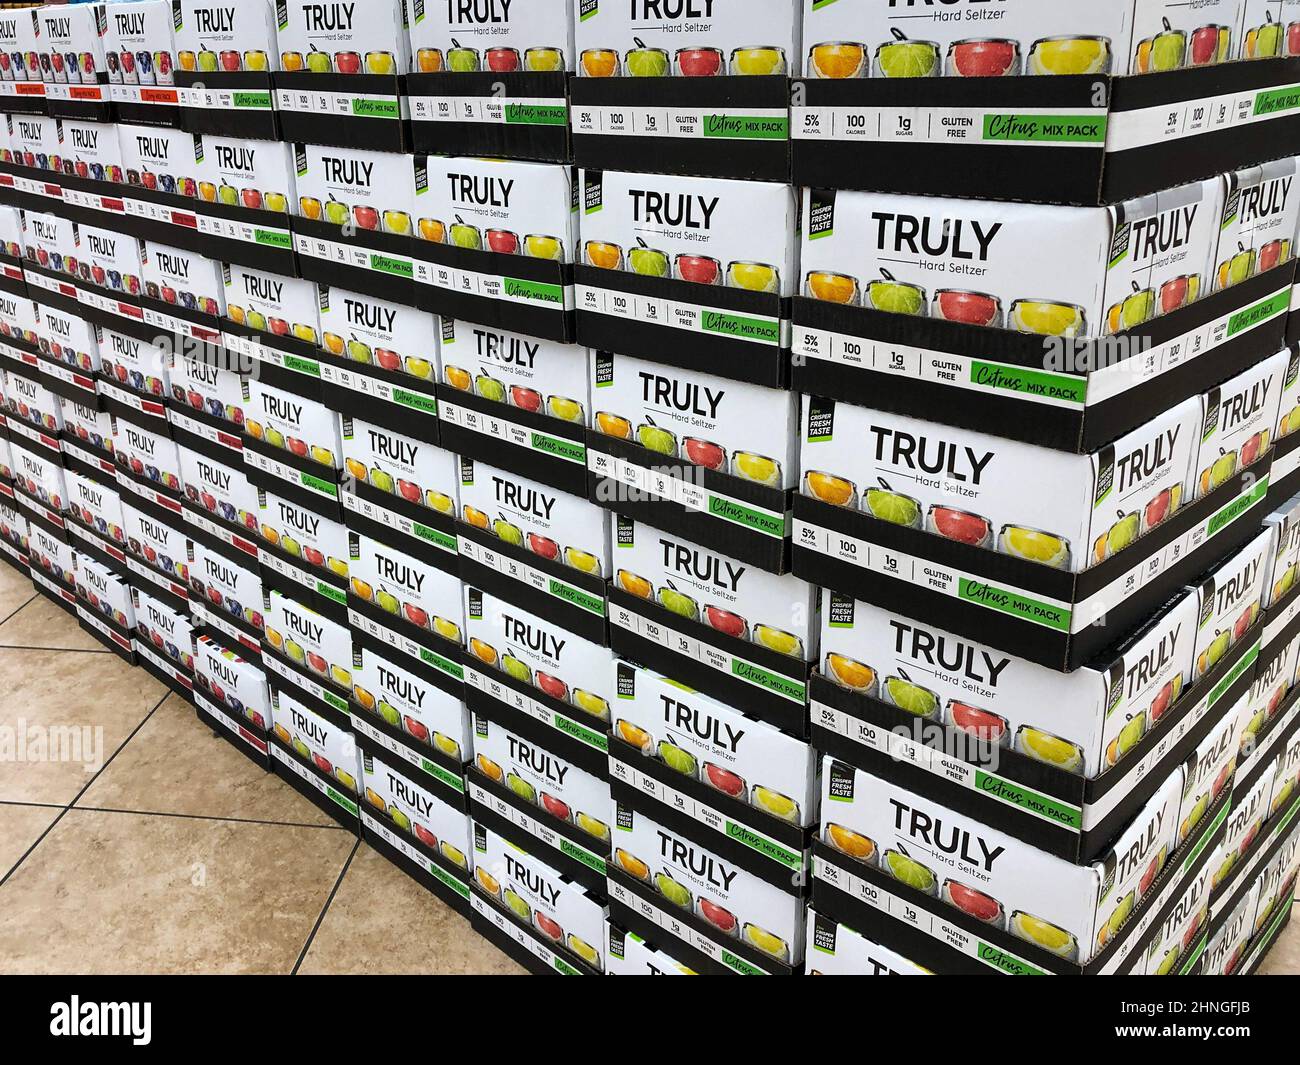 NEW BRAUNFELS, TX - 22 FEB 2020: Truly brand Hard Seltzer alcohol citric mix pack on display in stacks of boxes, for sale in a retail store. Stock Photo